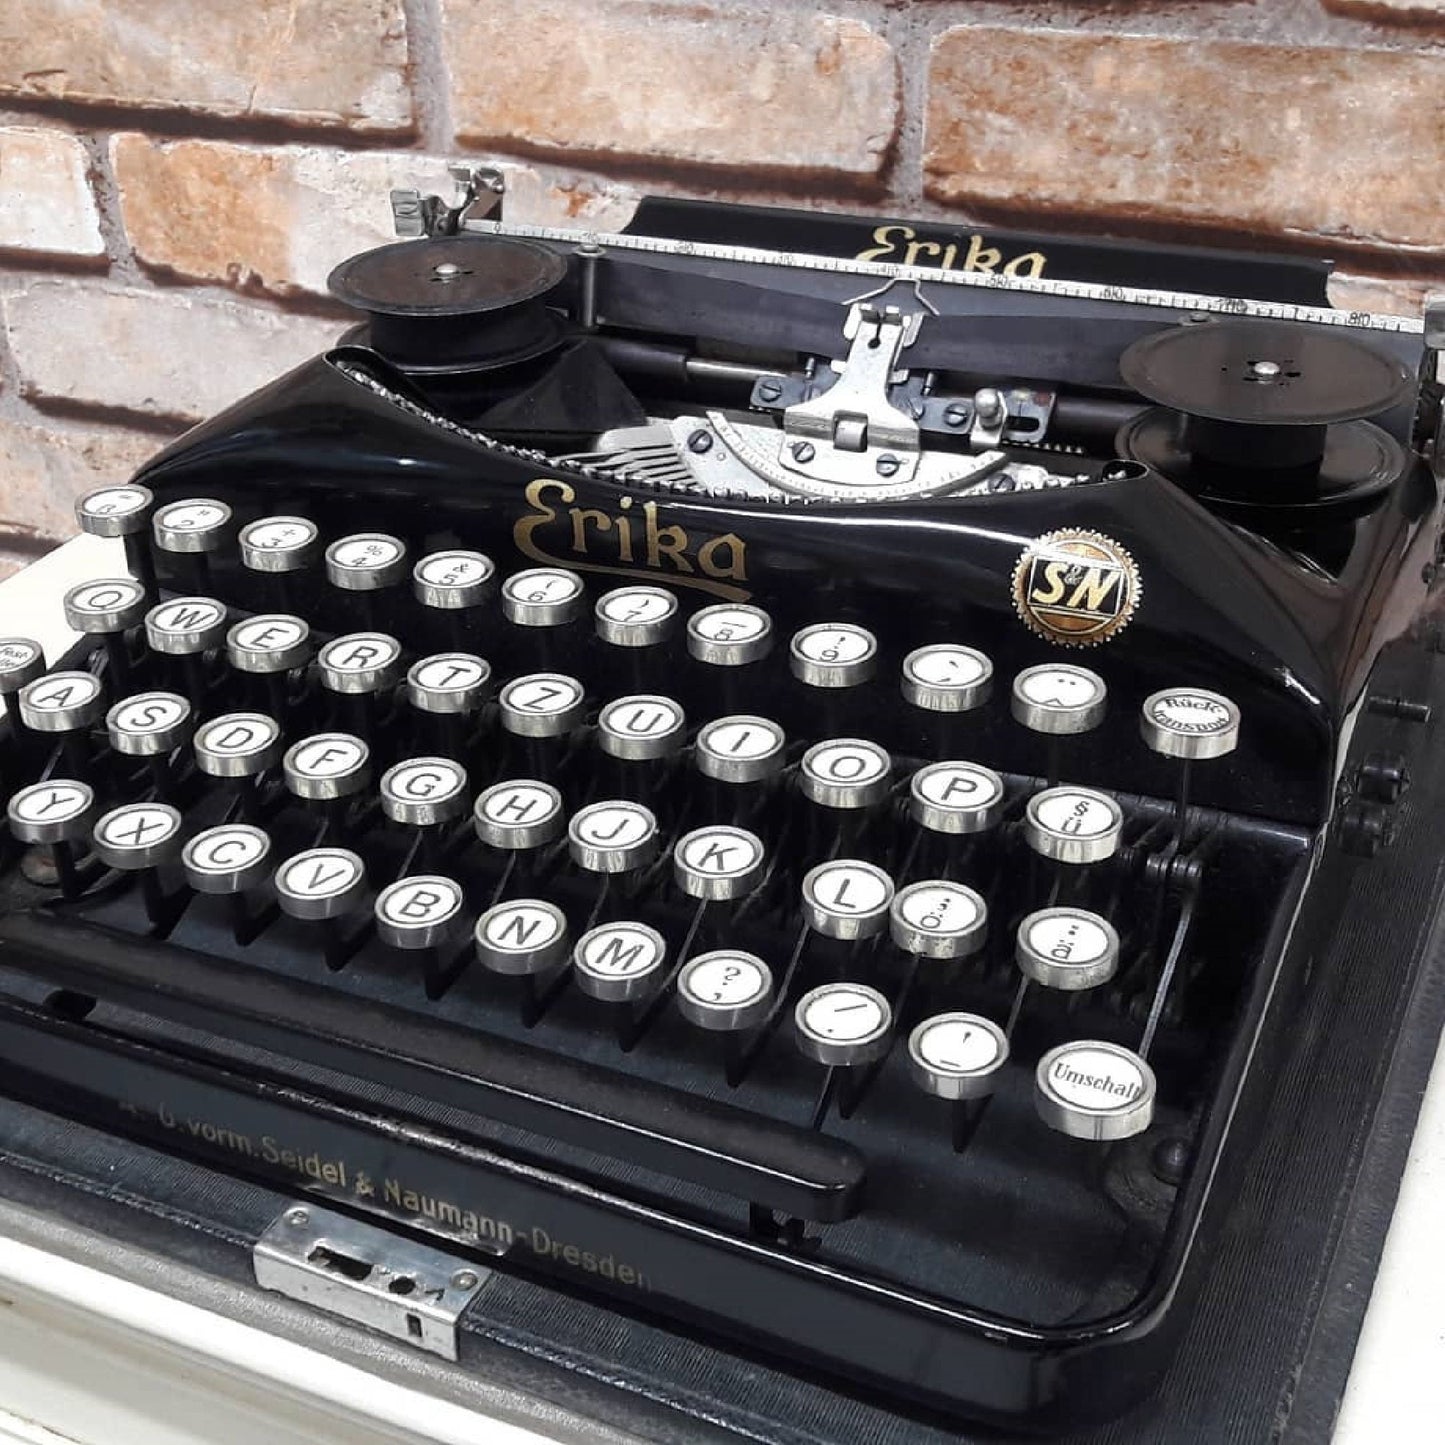 Erika Typewriter | Antique Charm, Fully Operational | Ideal Gift for Vintage Enthusiasts | Elevate Your Writing Experience!